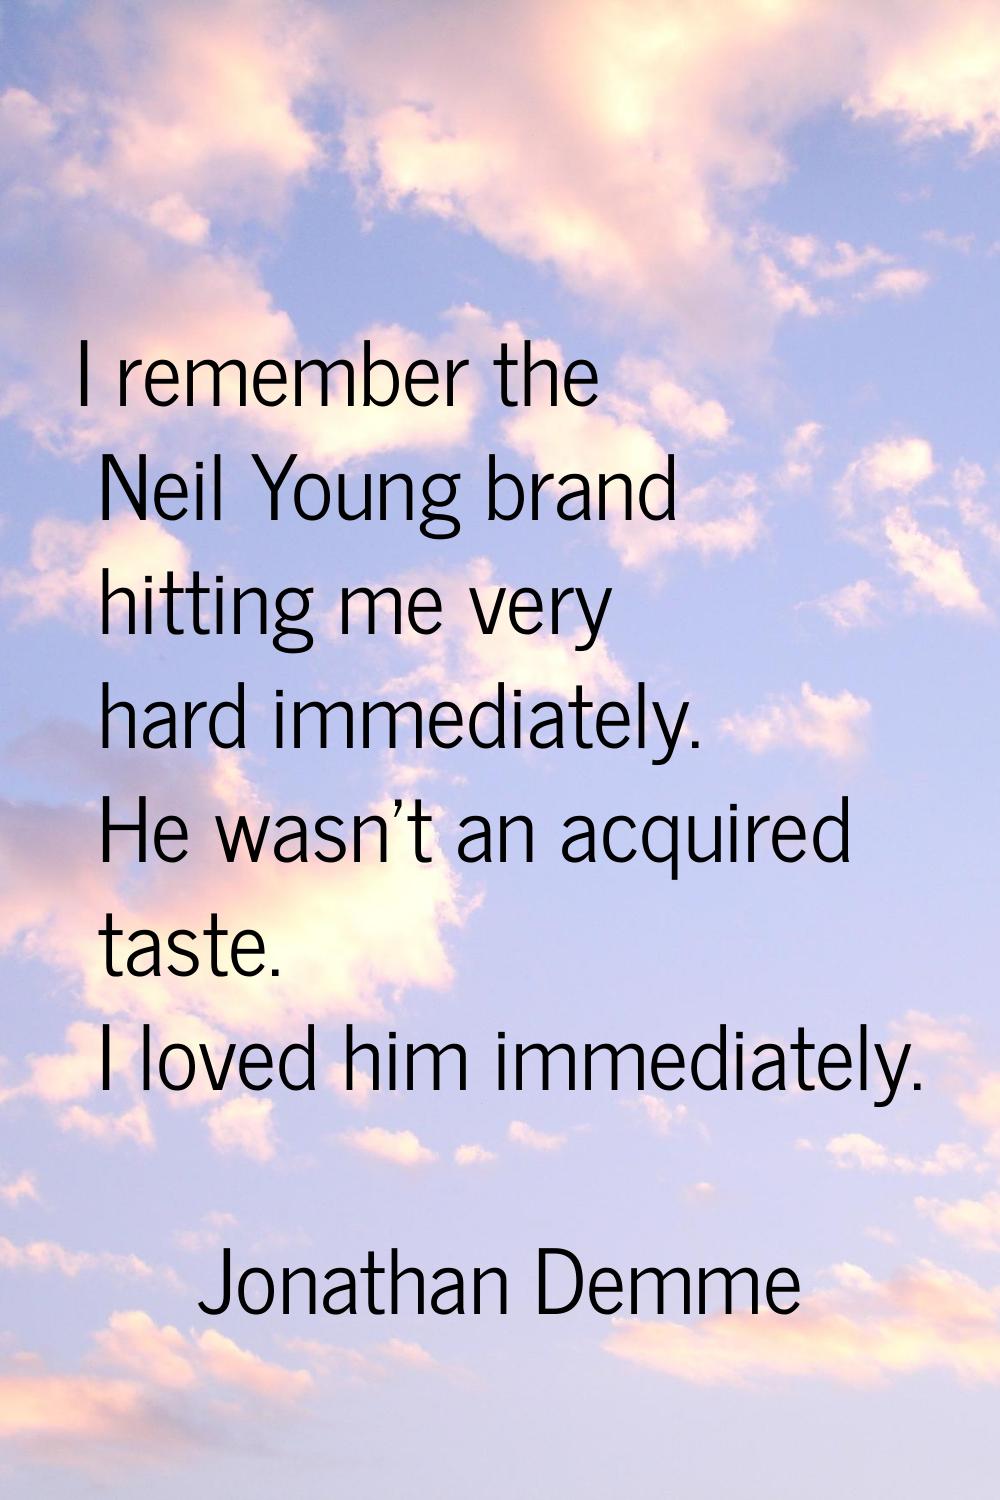 I remember the Neil Young brand hitting me very hard immediately. He wasn't an acquired taste. I lo